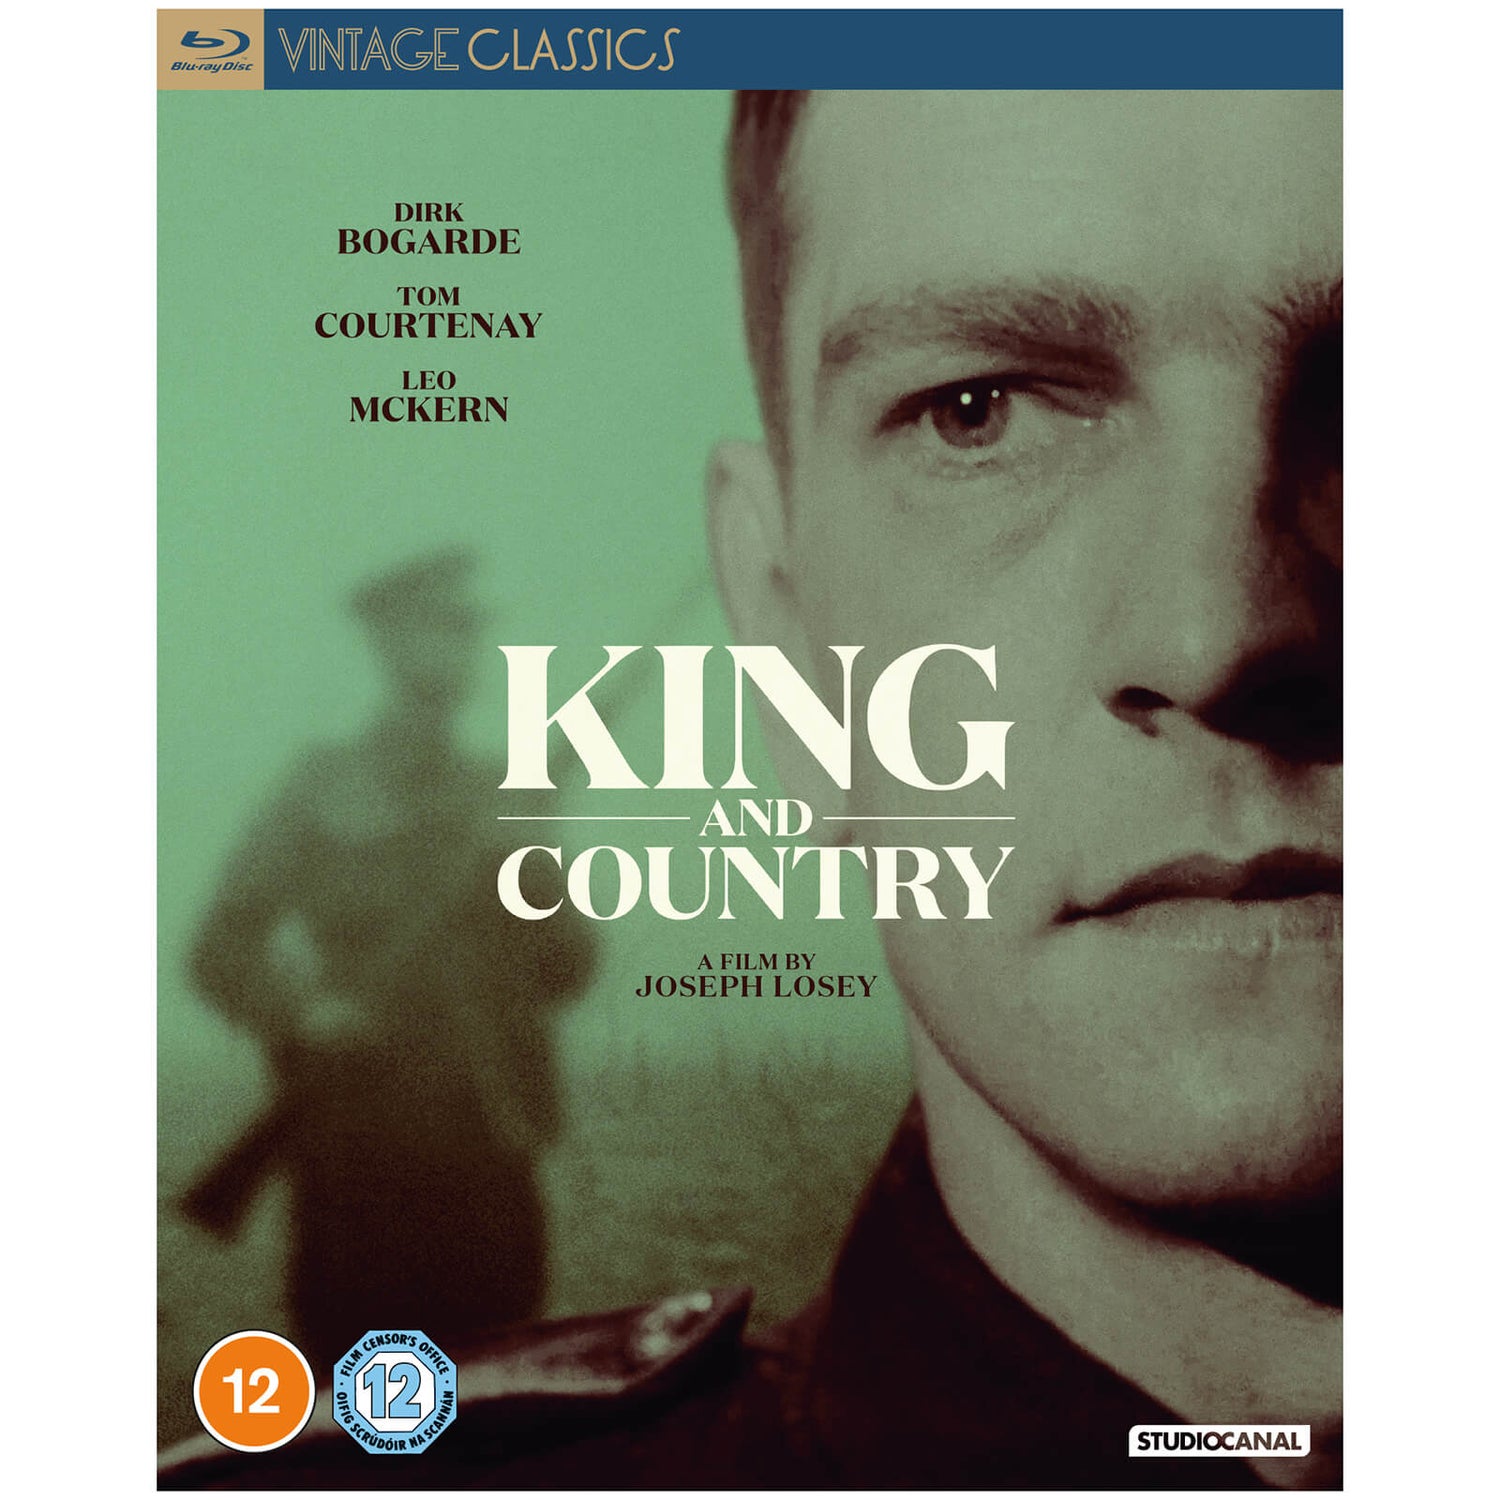 King and Country (Vintage Classics)